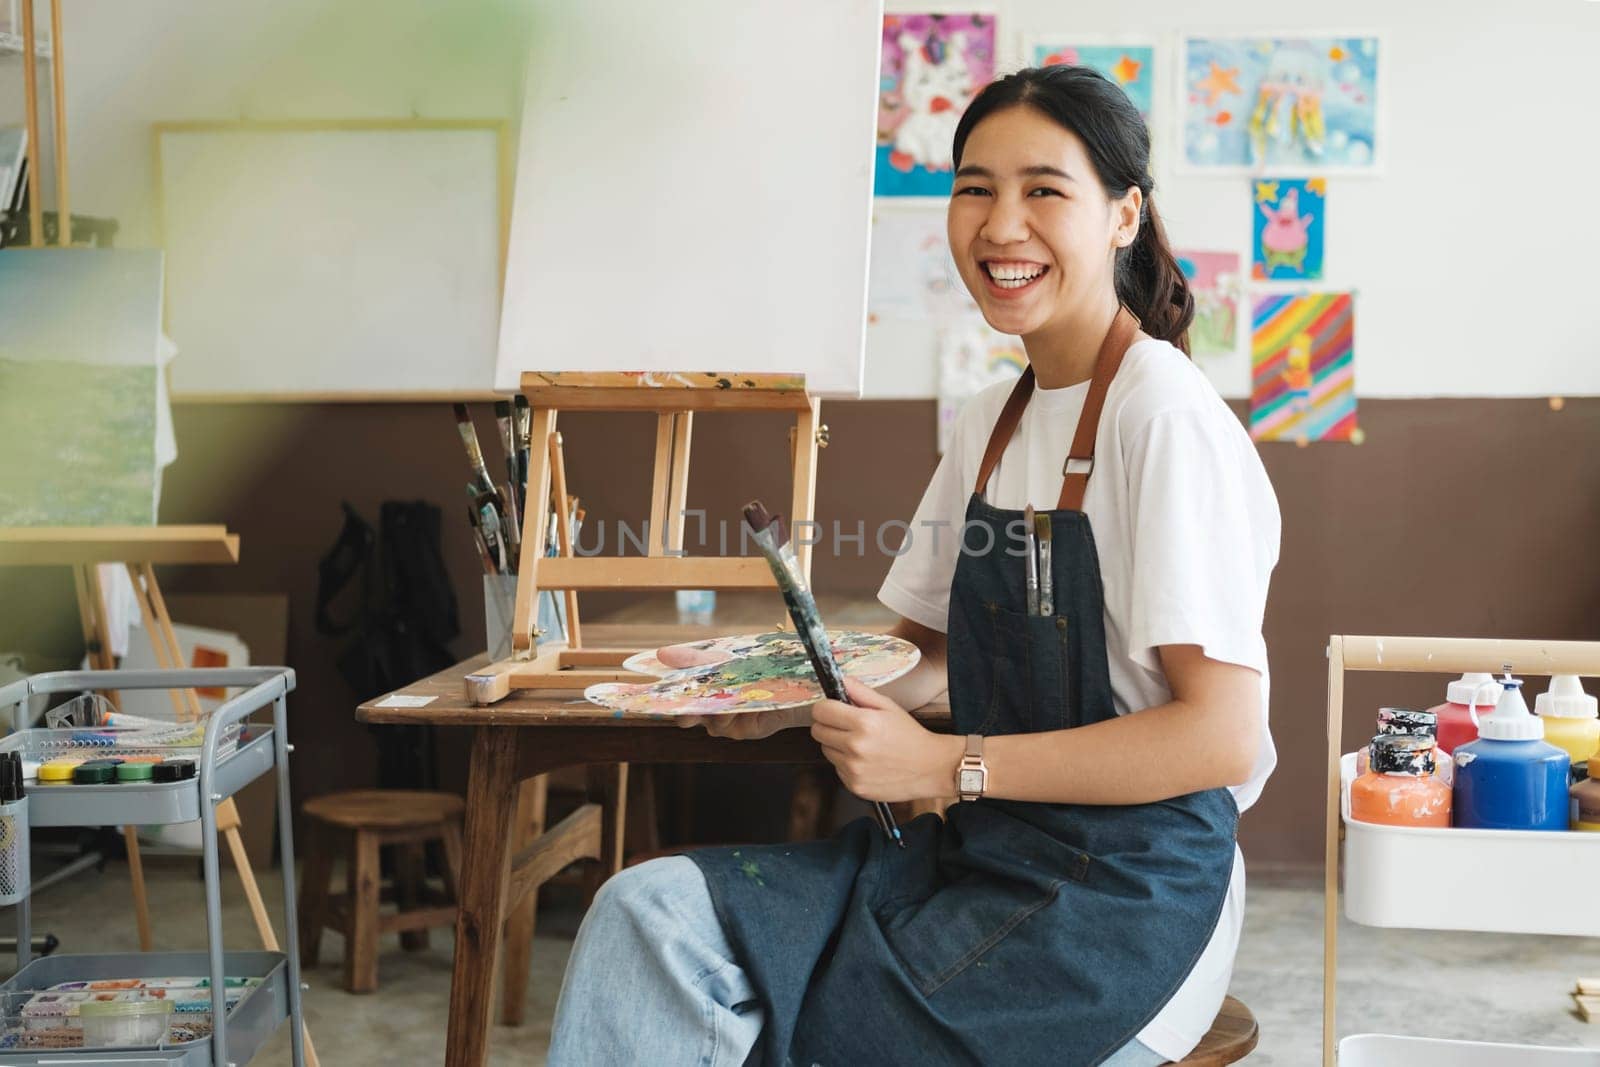 The young artist female is wearing an apron smeared with paint clutching many brushes and paintbrushes stnading and smiling to the camera in her studio workshop or art gallery. Hobby and lifestyle concept.